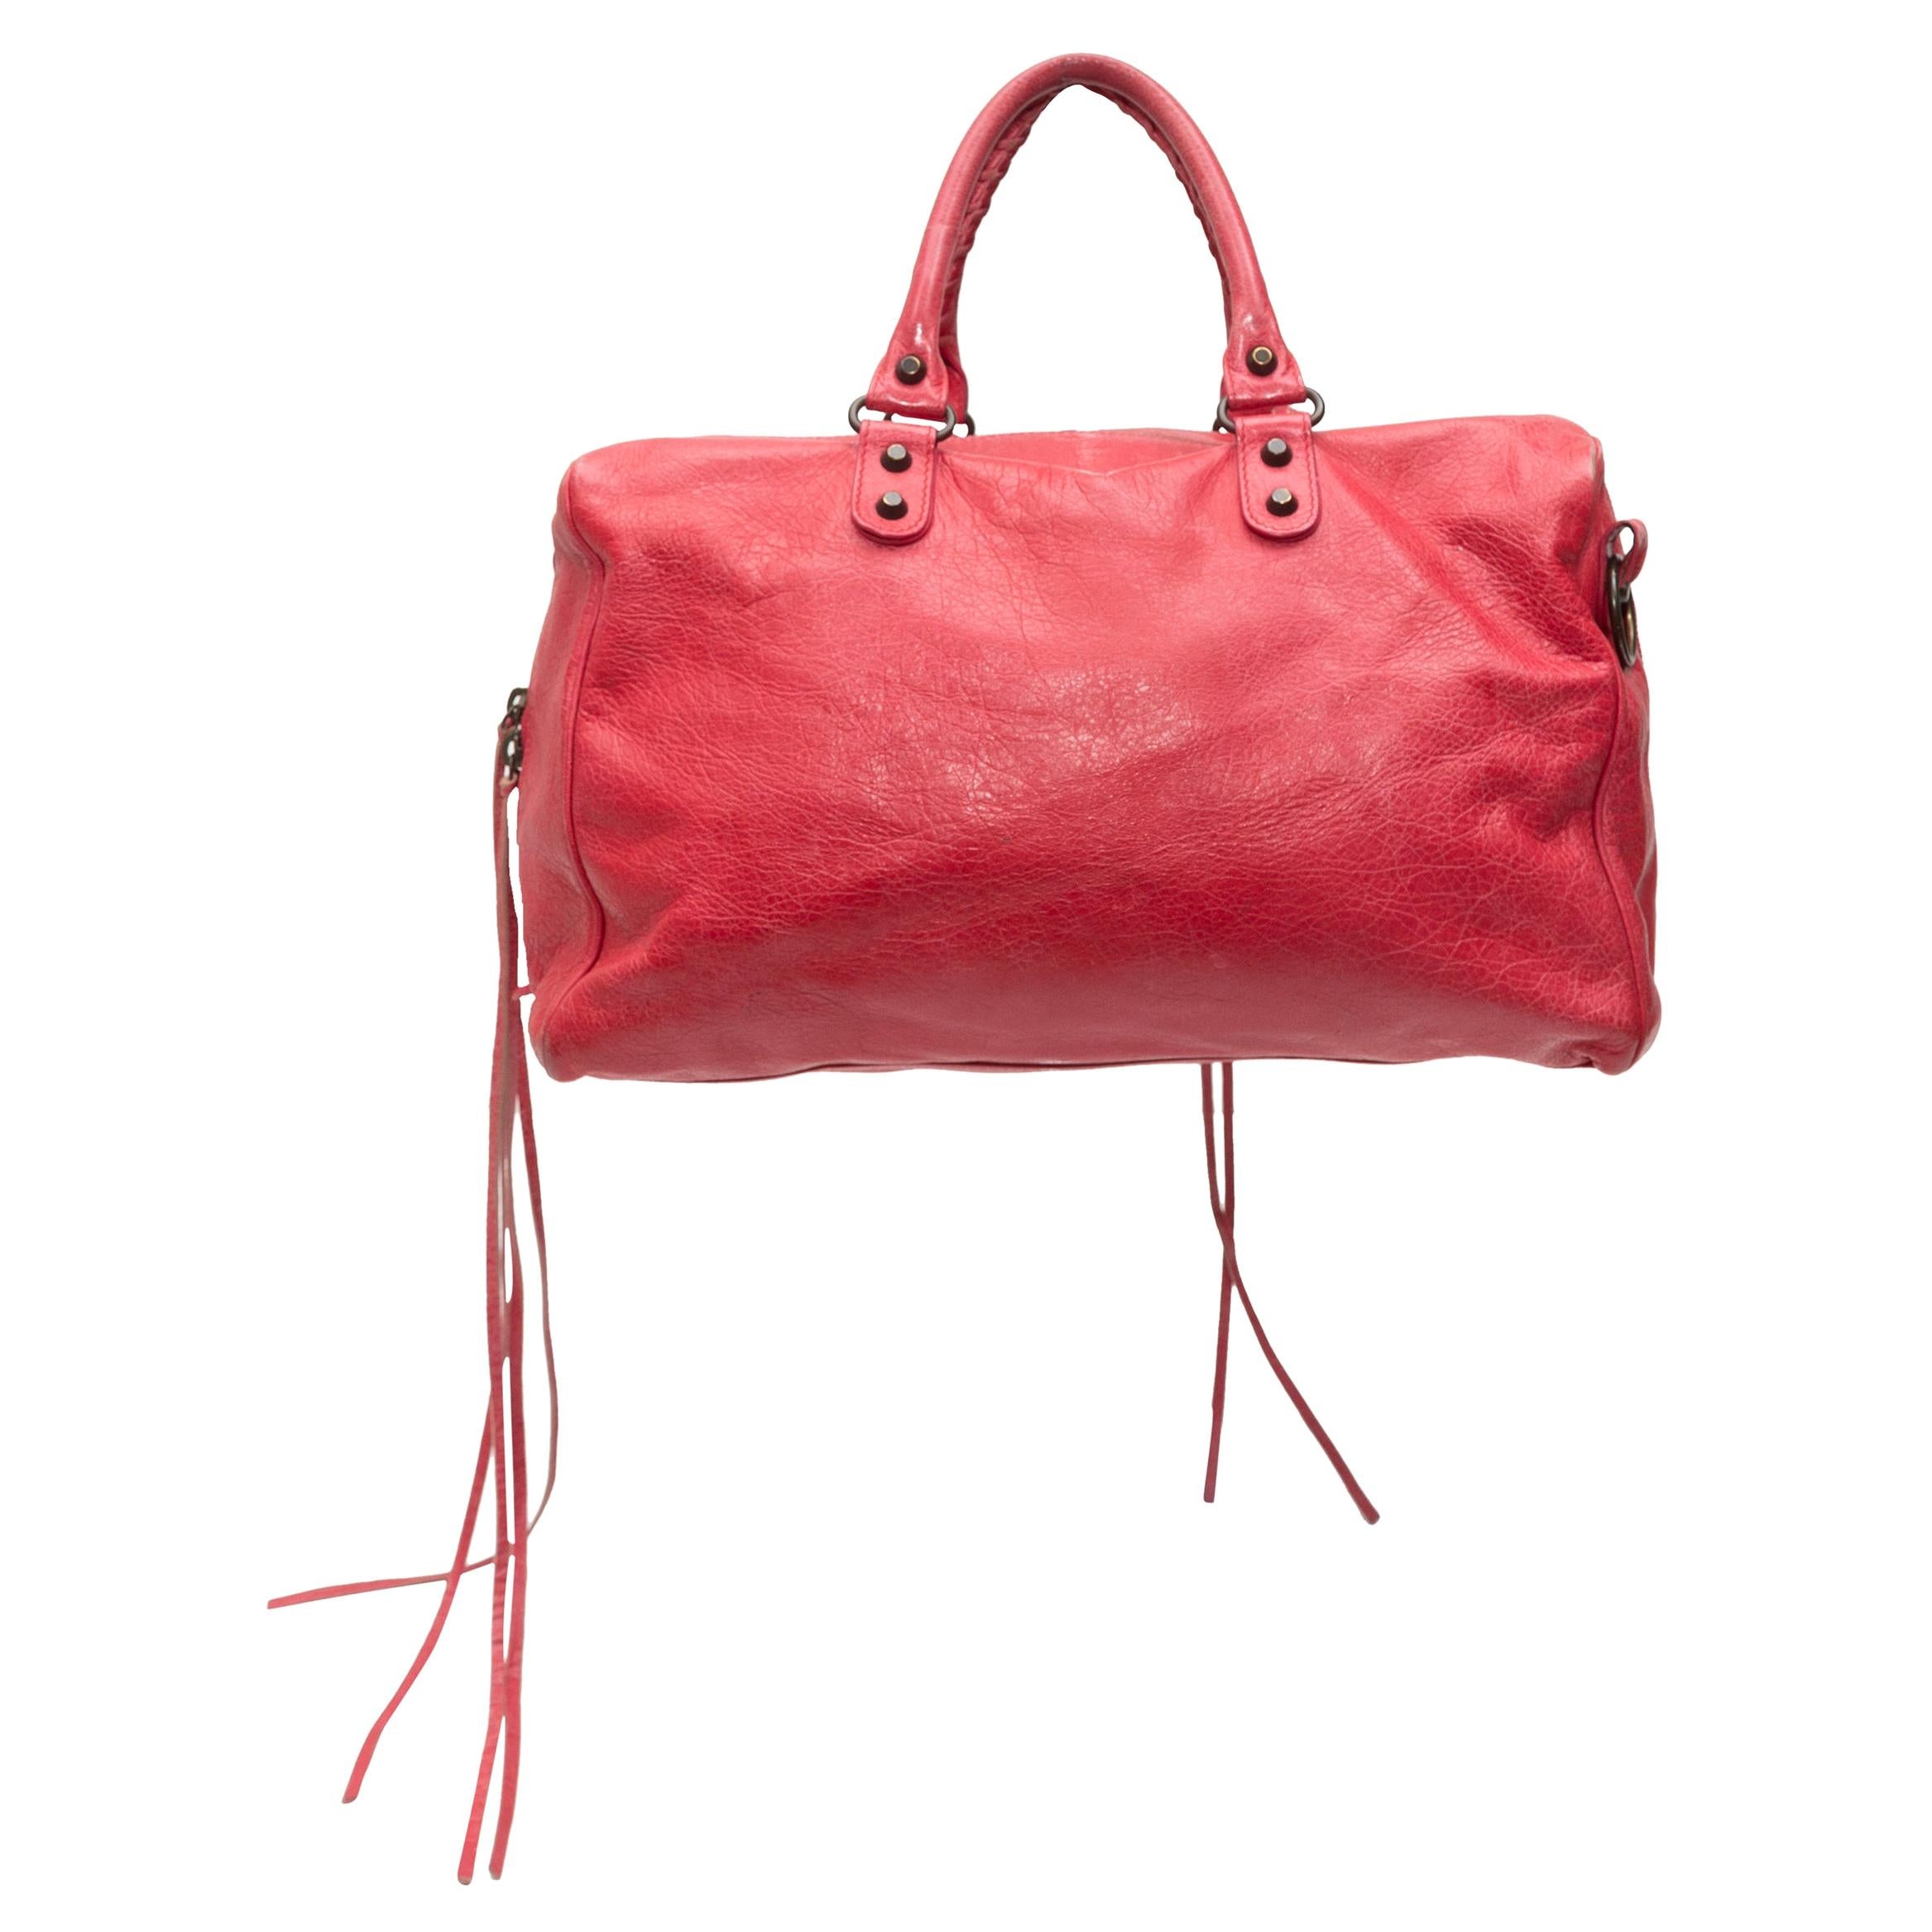 Balenciaga Hot Pink Classic Polly Leather Satchel